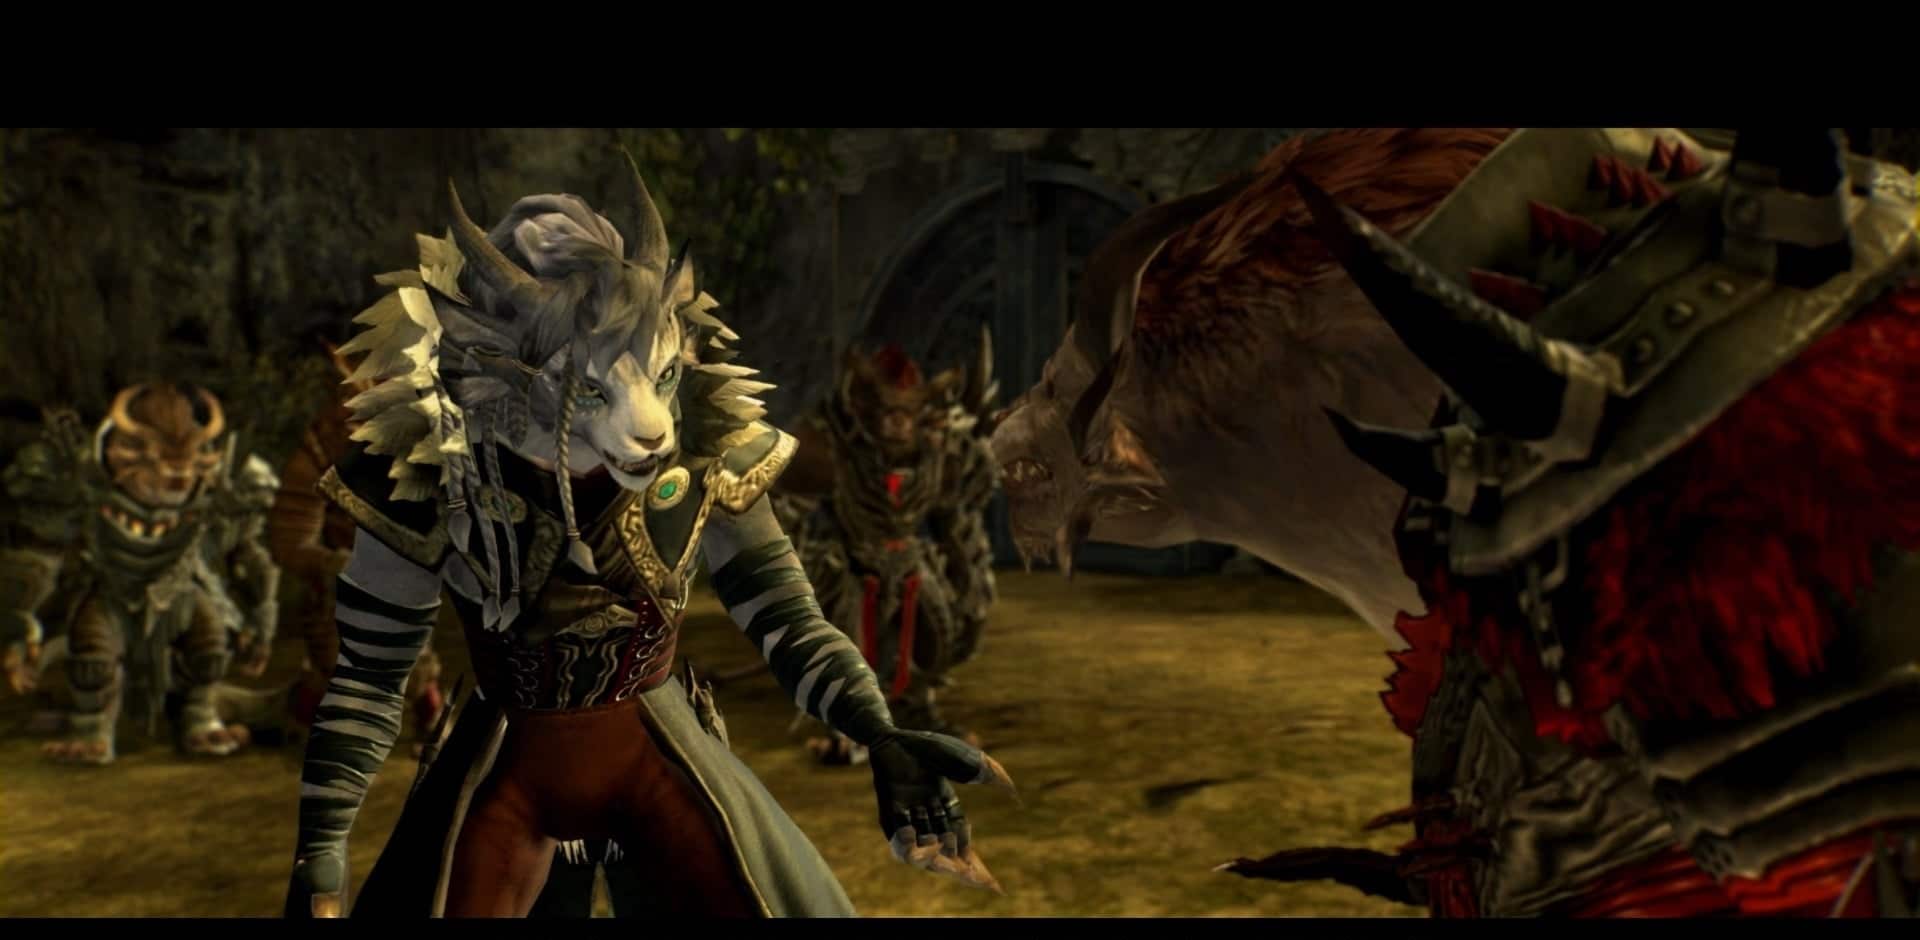 Story missions have fully dubbed dialogue. The most recent content features some elaborate animated cutscenes.